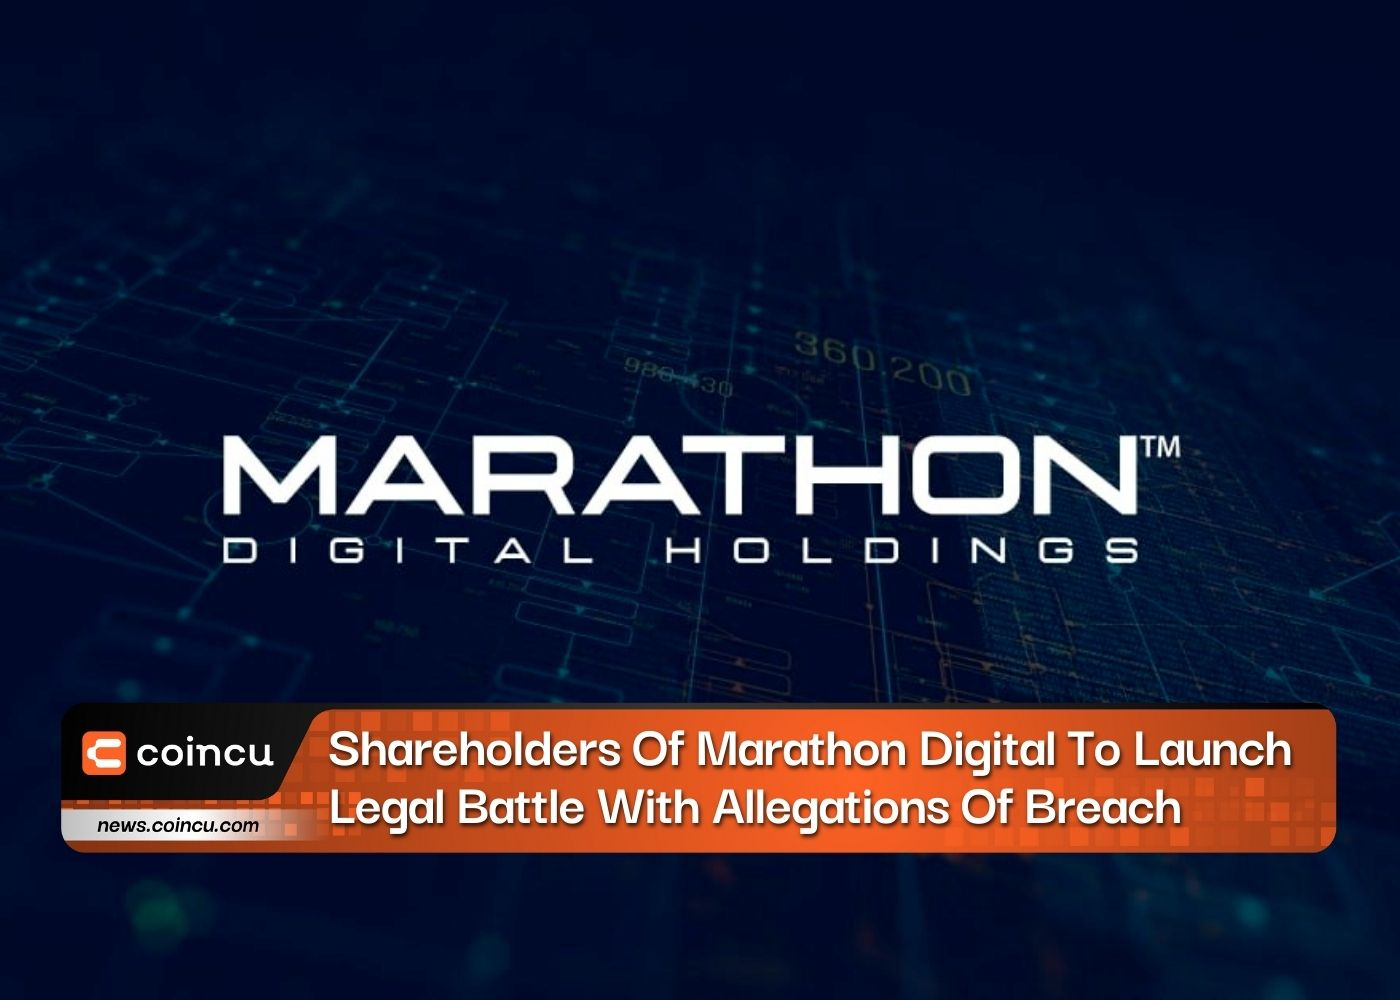 Shareholders Of Marathon Digital To Launch Legal Battle With Allegations Of Breach